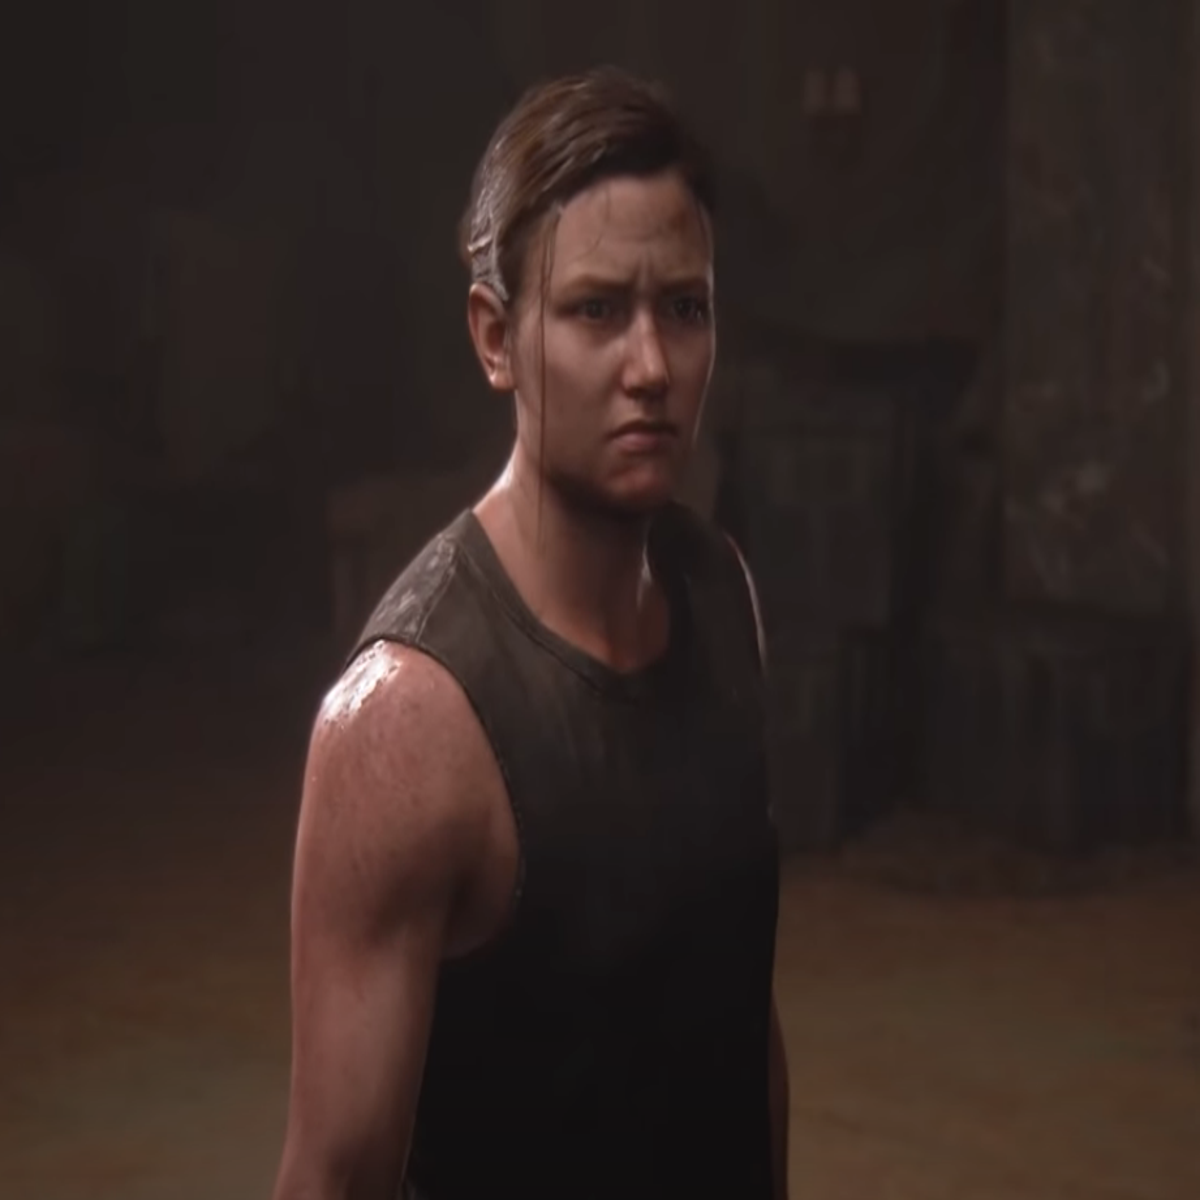 TLOU2 - meet Abby's face actor and incredible body model